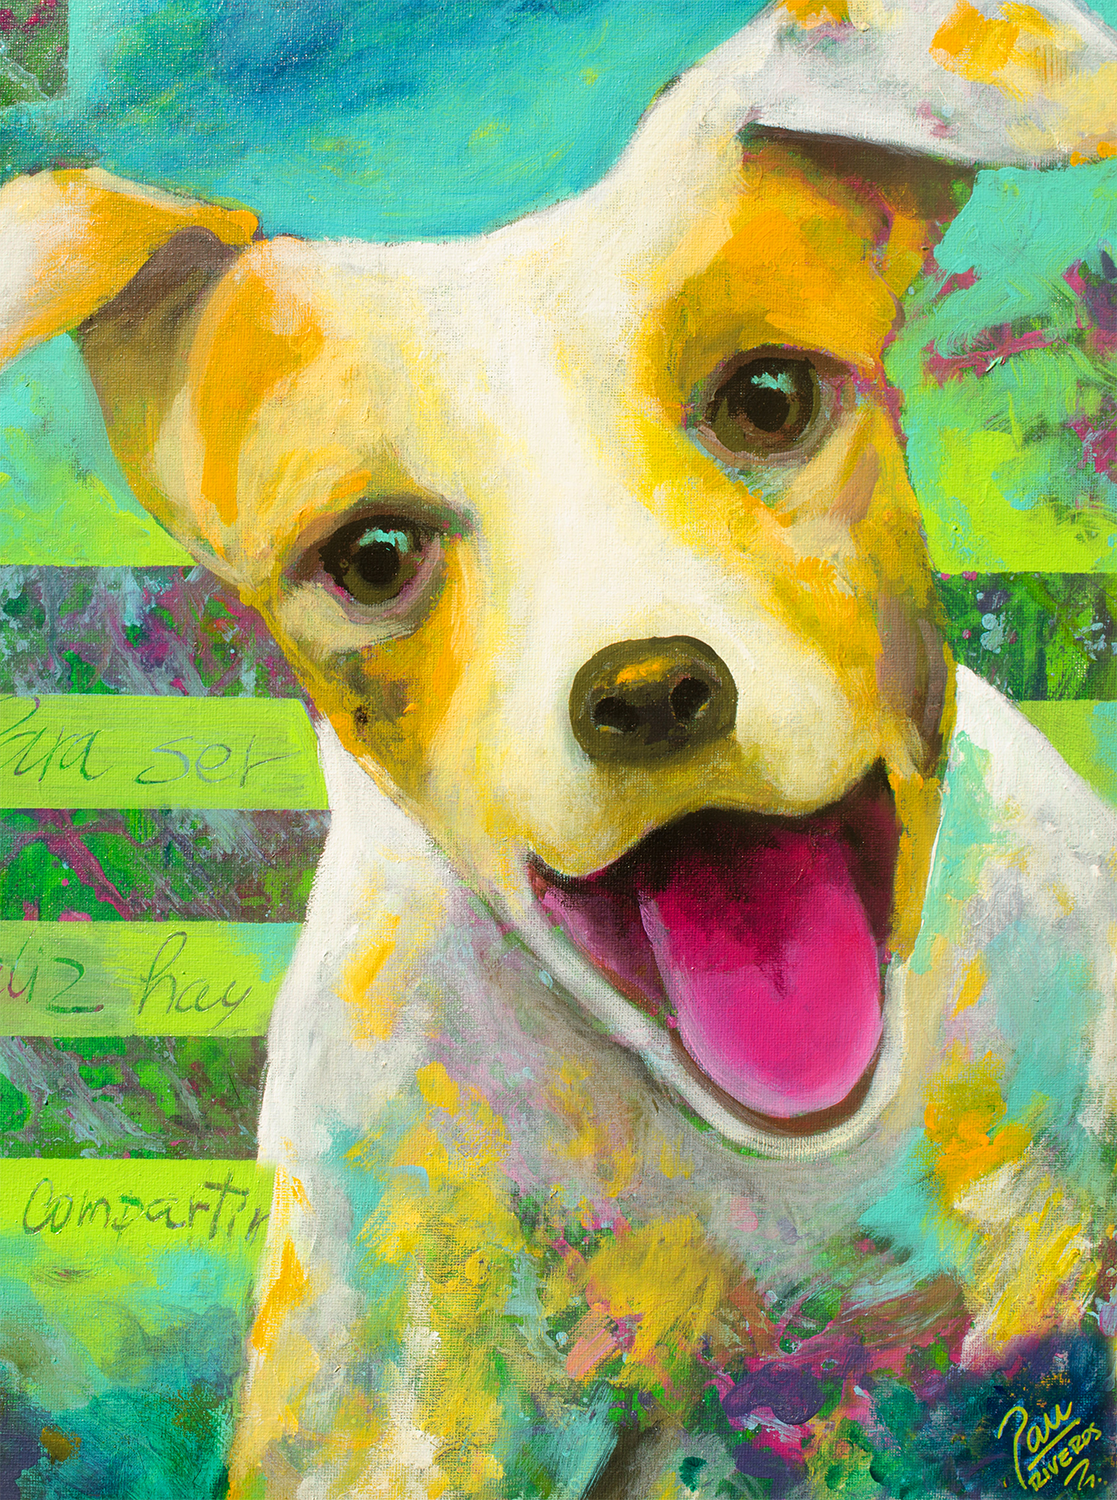 Zaguate, a wise and happy dog - Costa Rica Art 12 x 16"